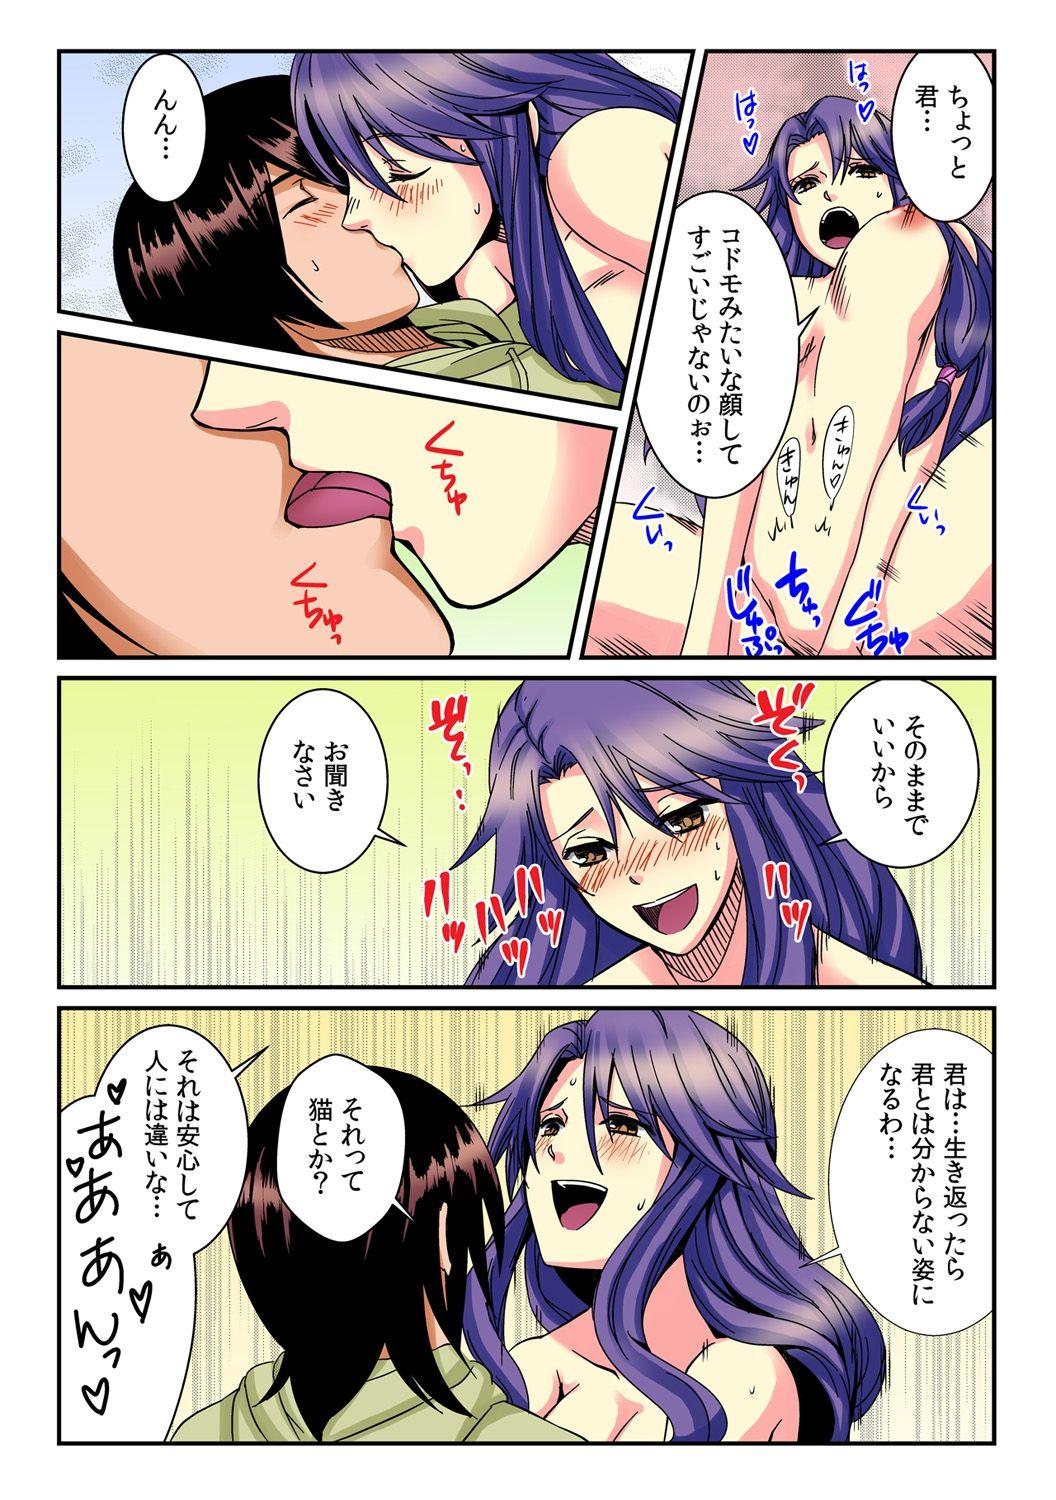 Creamy [Akagi Gijou / Akahige] I became a girl- and I definitely can't let anyone find out! (Full color) 1 Tinytits - Page 10